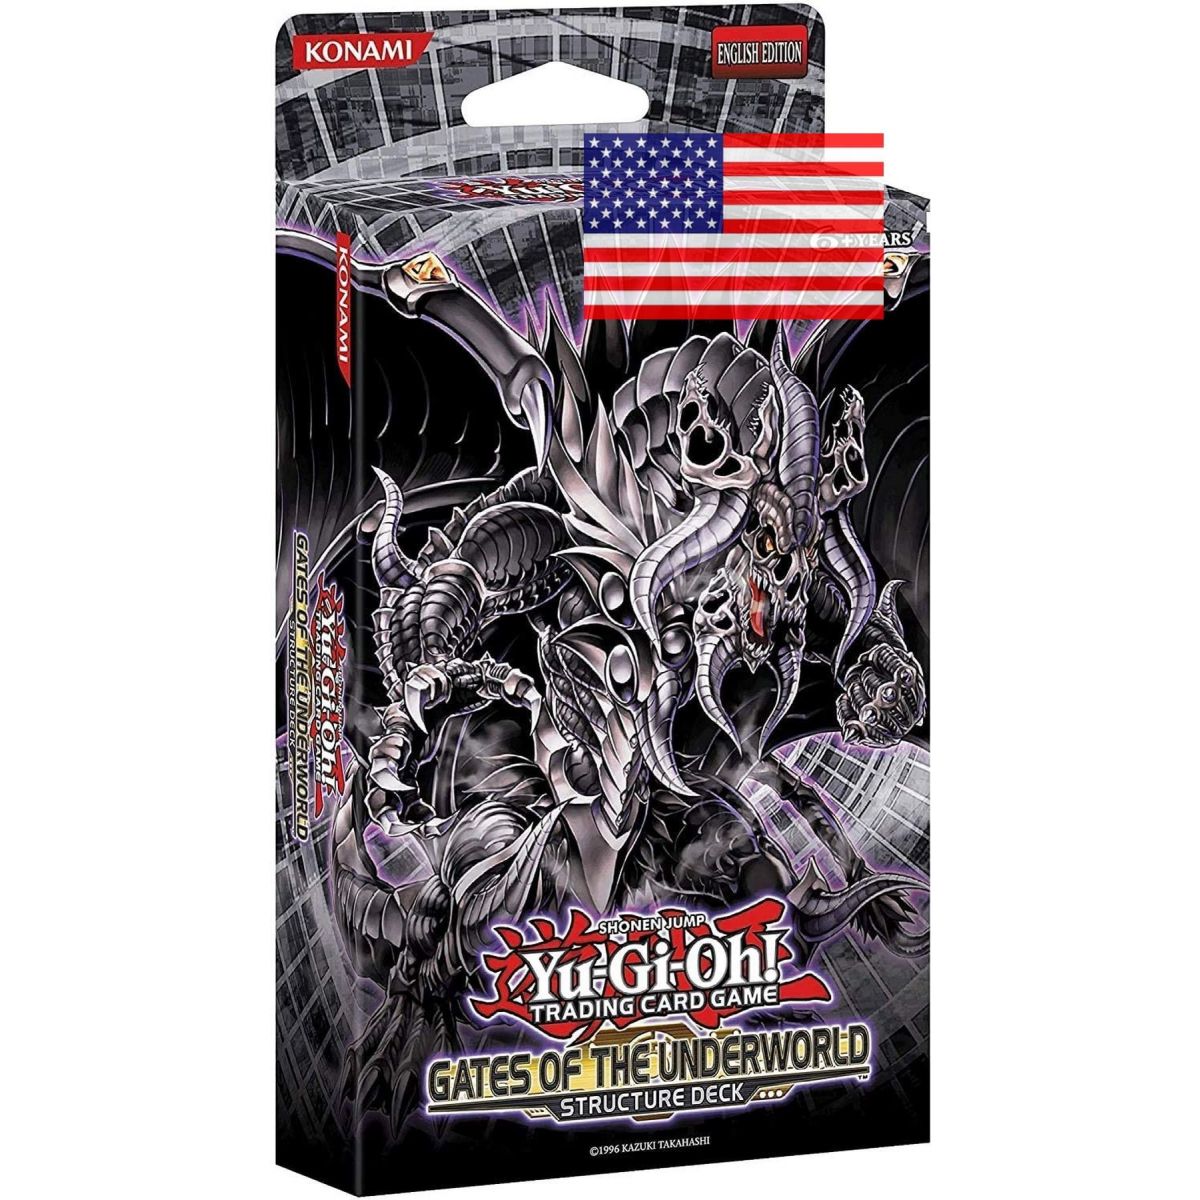 Item *US Print SEALED* Yu-Gi-Oh! - Structure Deck - Gates of The Underworld - Unlimited